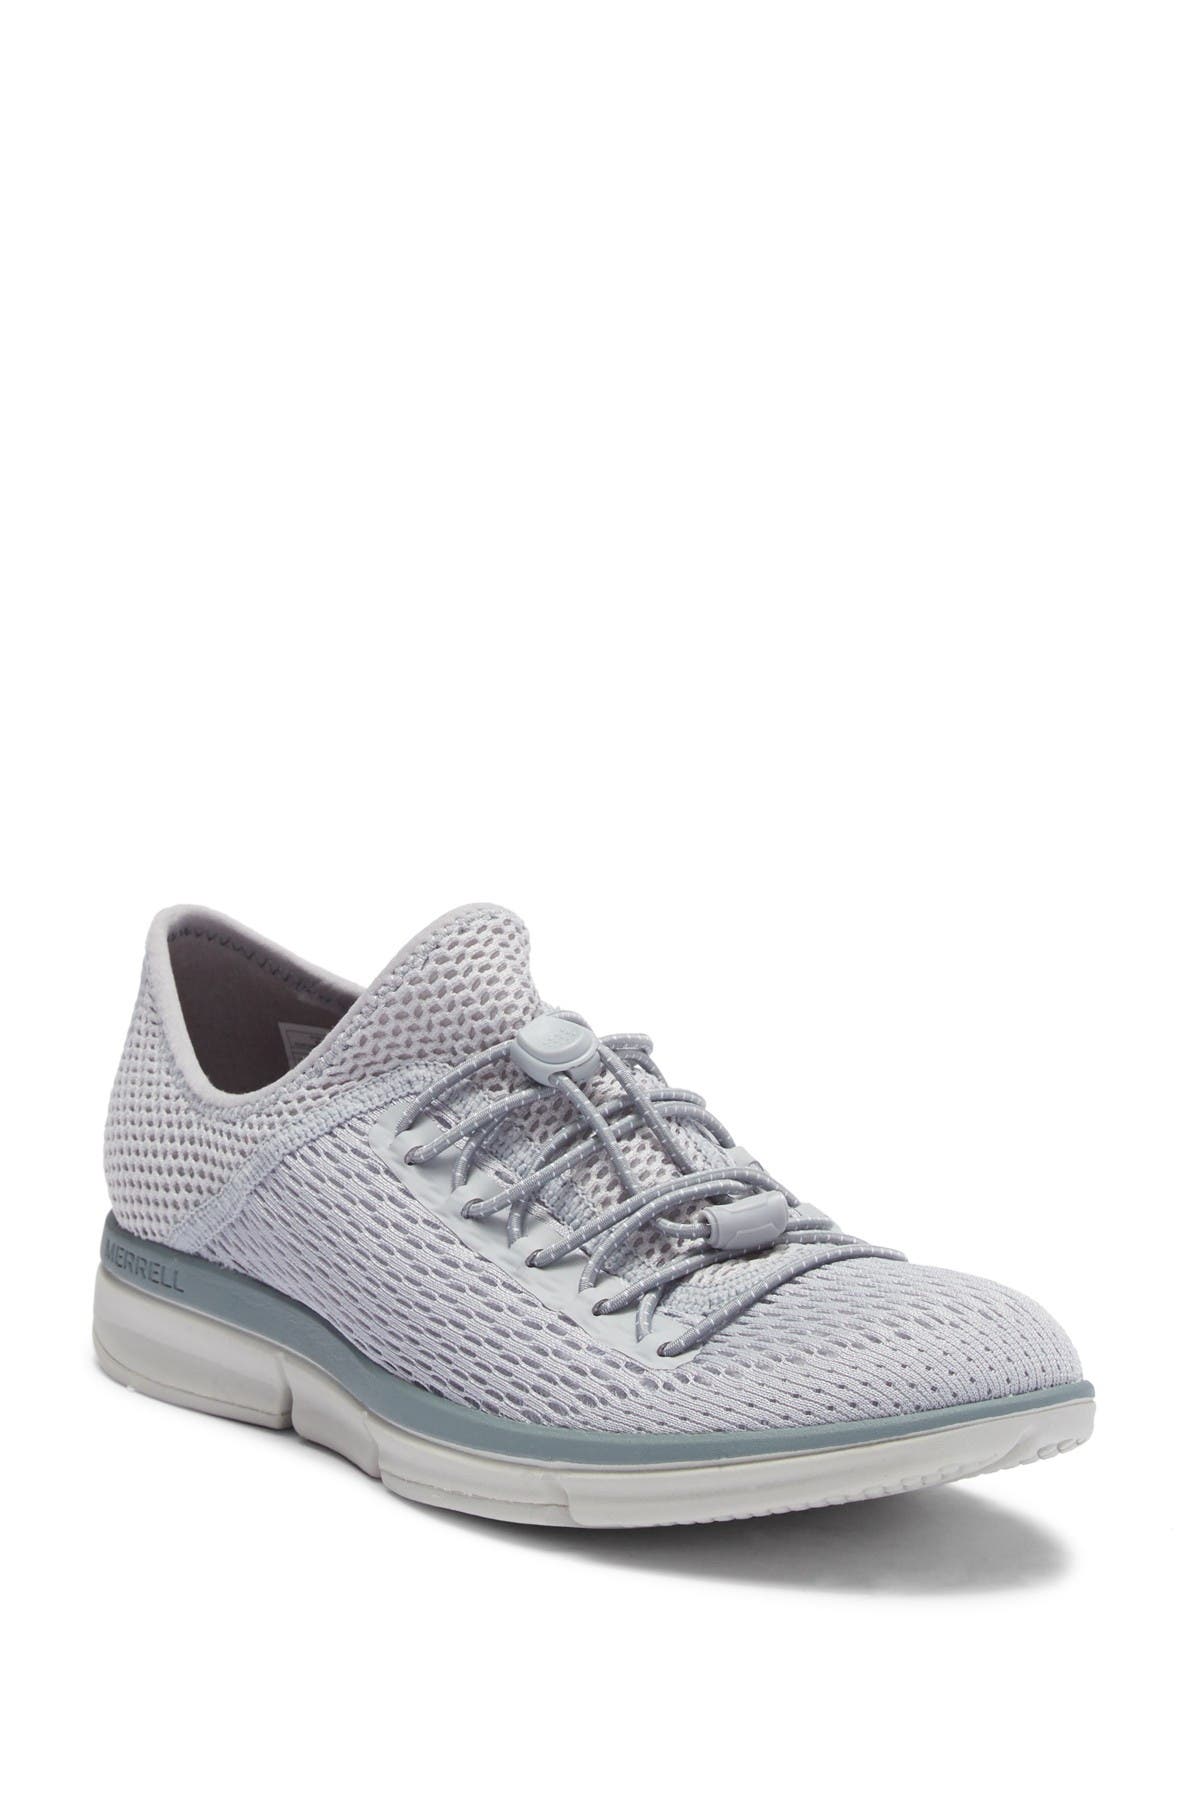 merrell zoe sojourn lace knit q2 sneakers